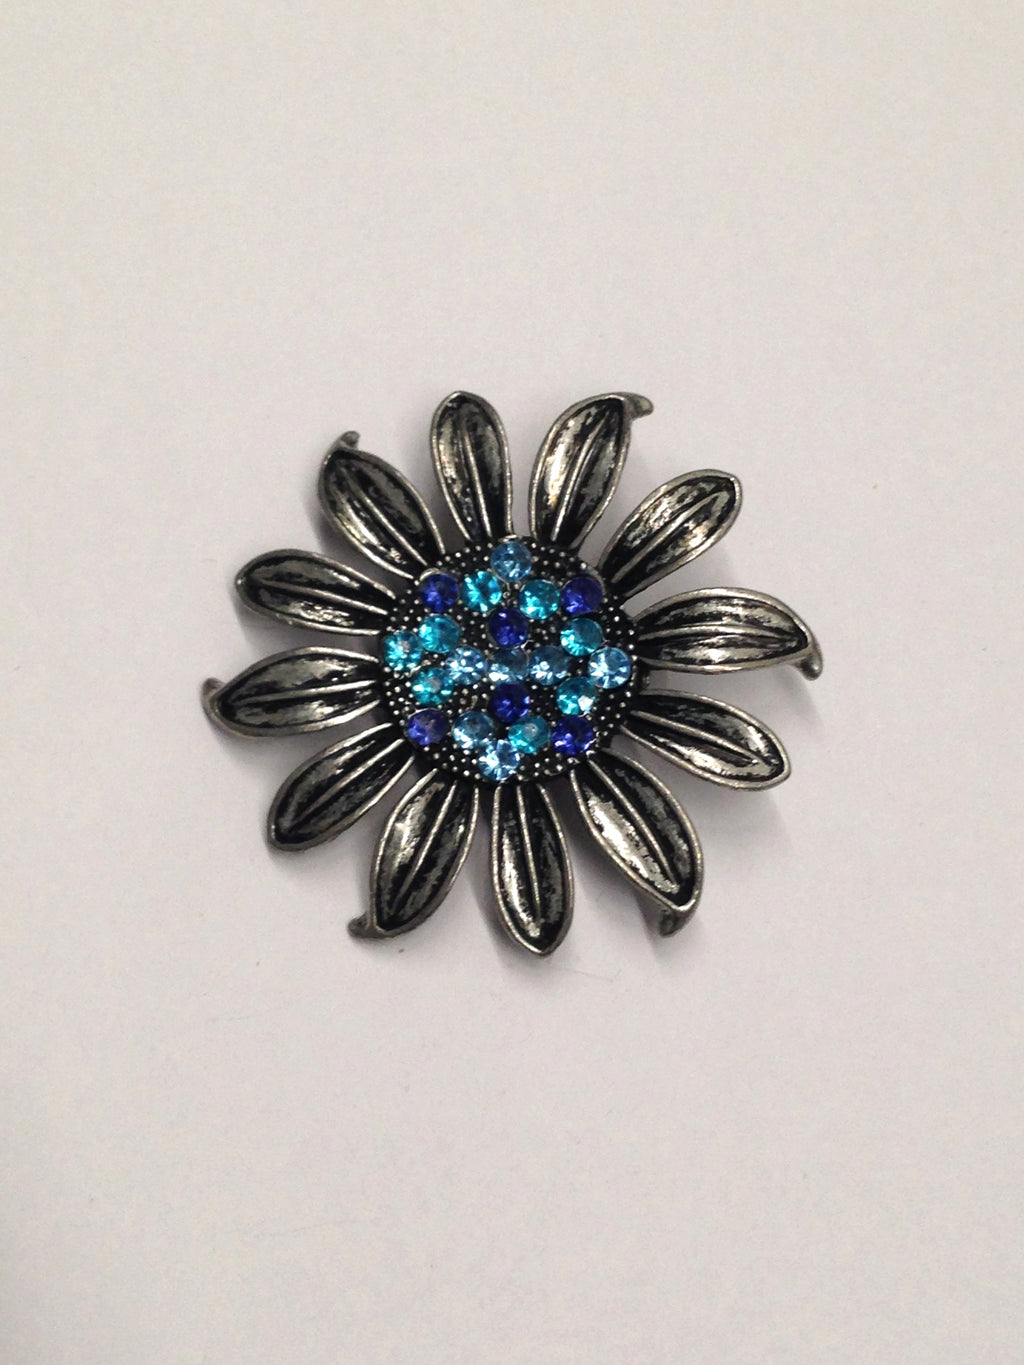 Flower Brooch With Blue Rhinestone Center – Hers and His Treasures